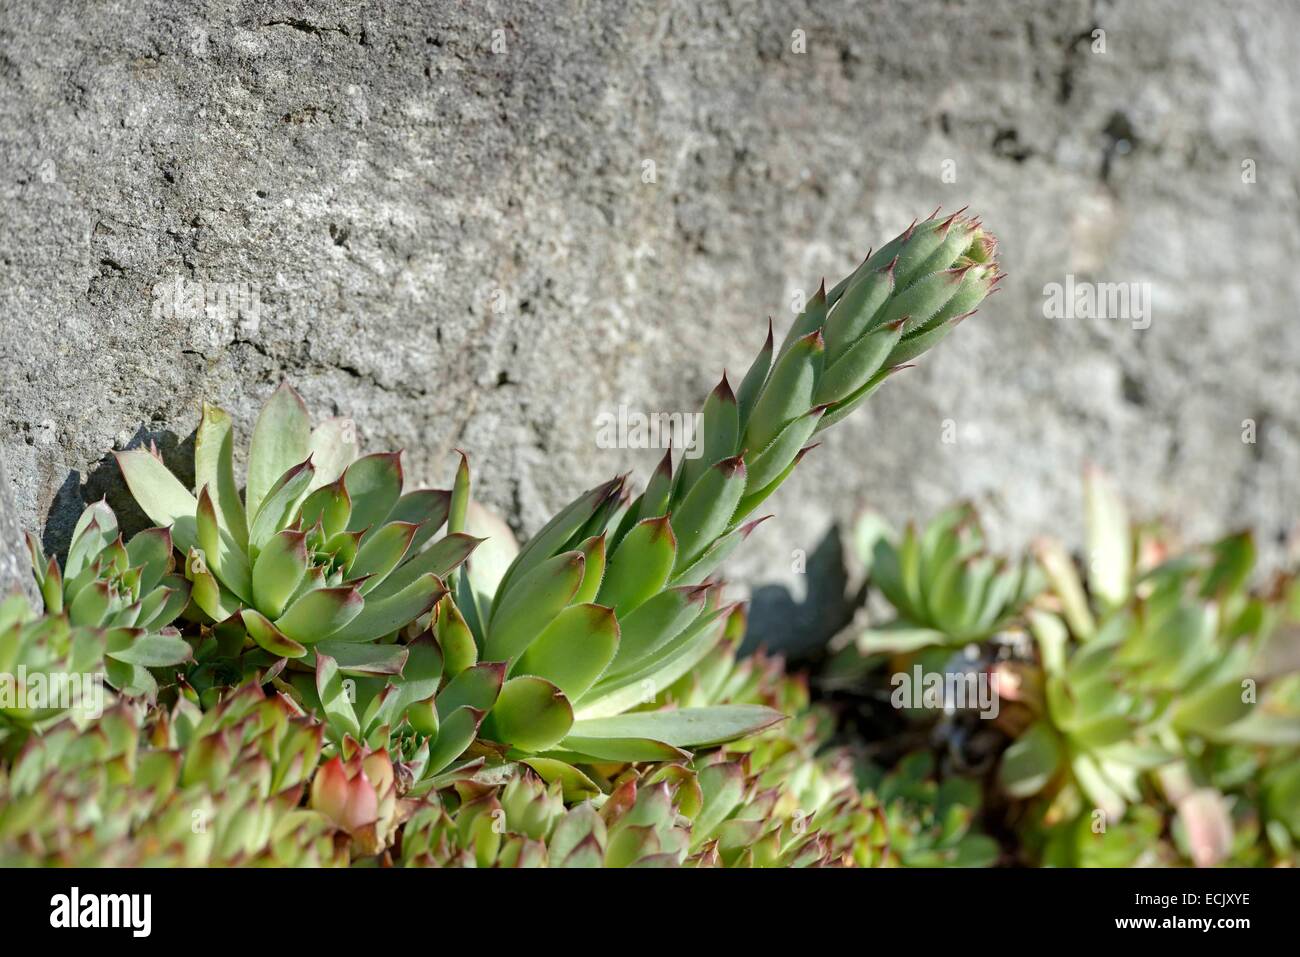 France, Doubs, Brognard, succulents growing in a rip rapped bank Stock Photo